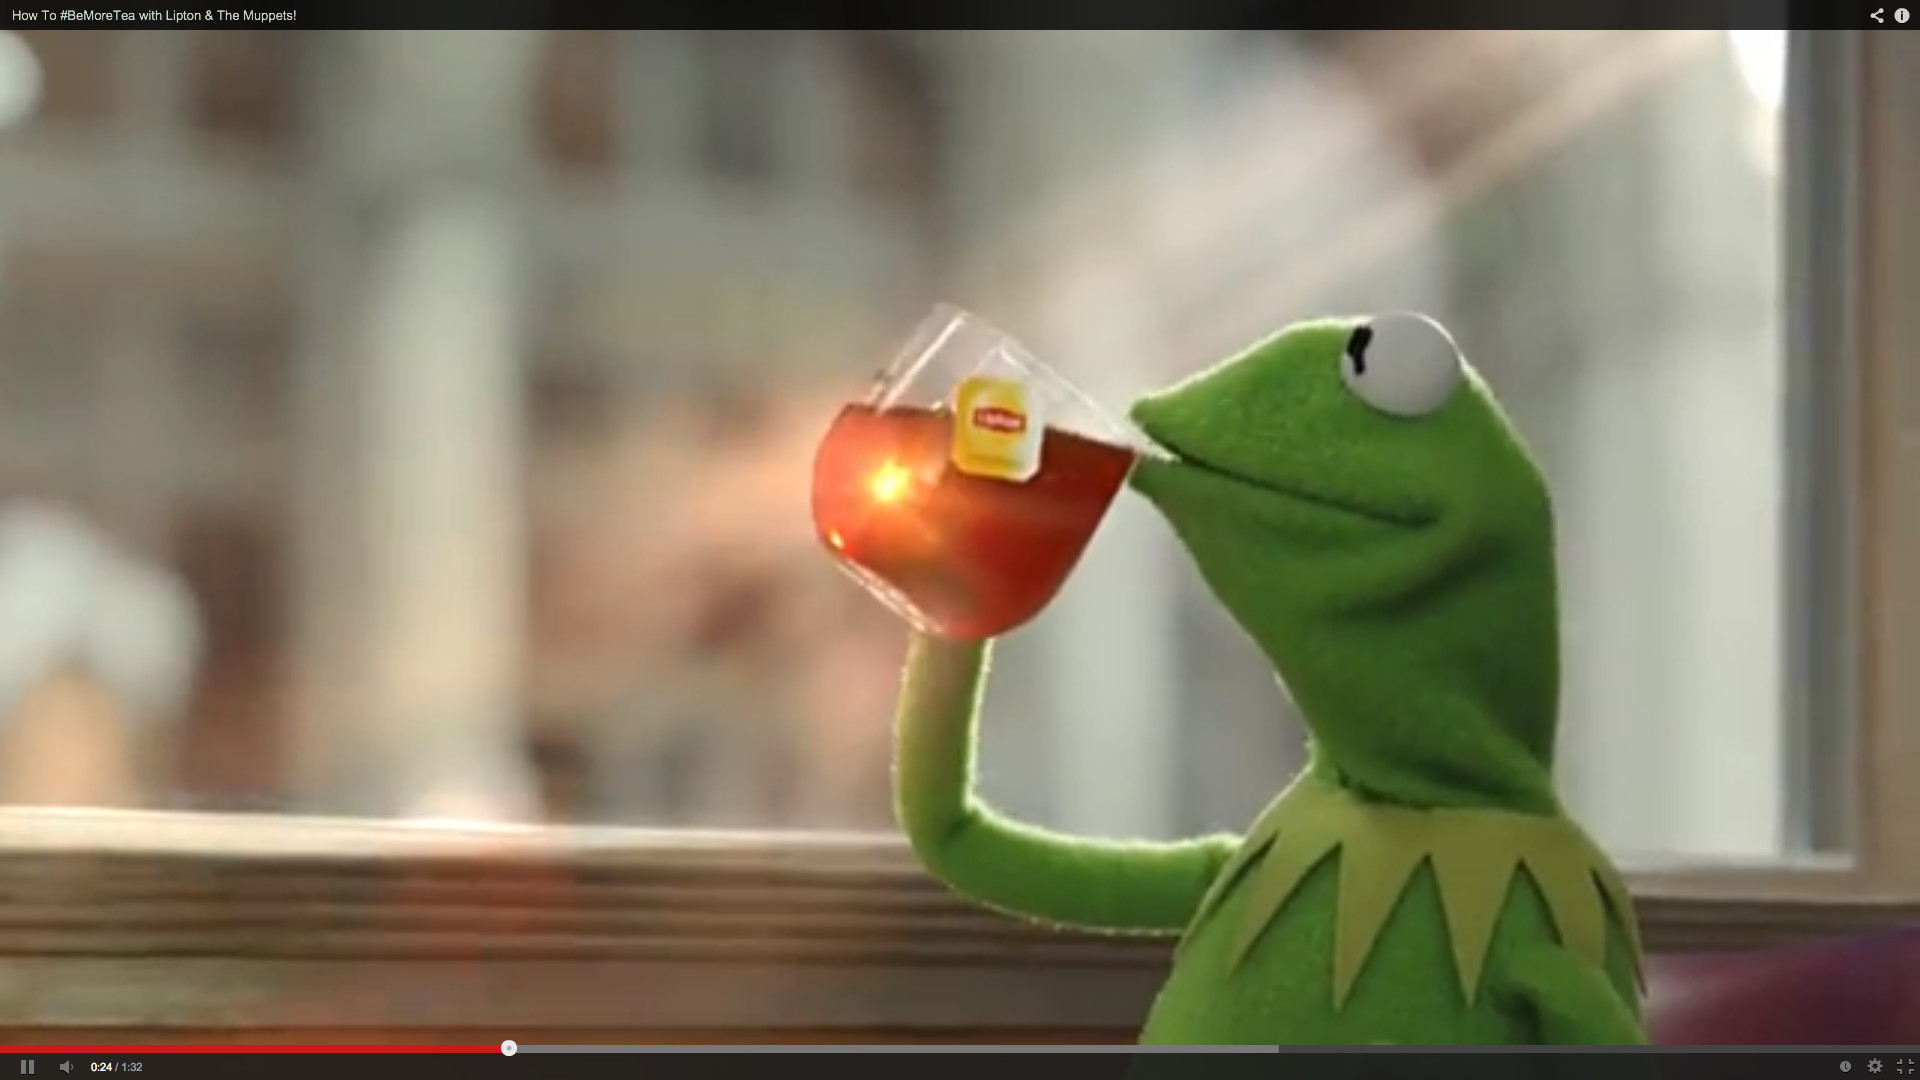 1920x1080 Kermit the Frog casually sipping on some tea